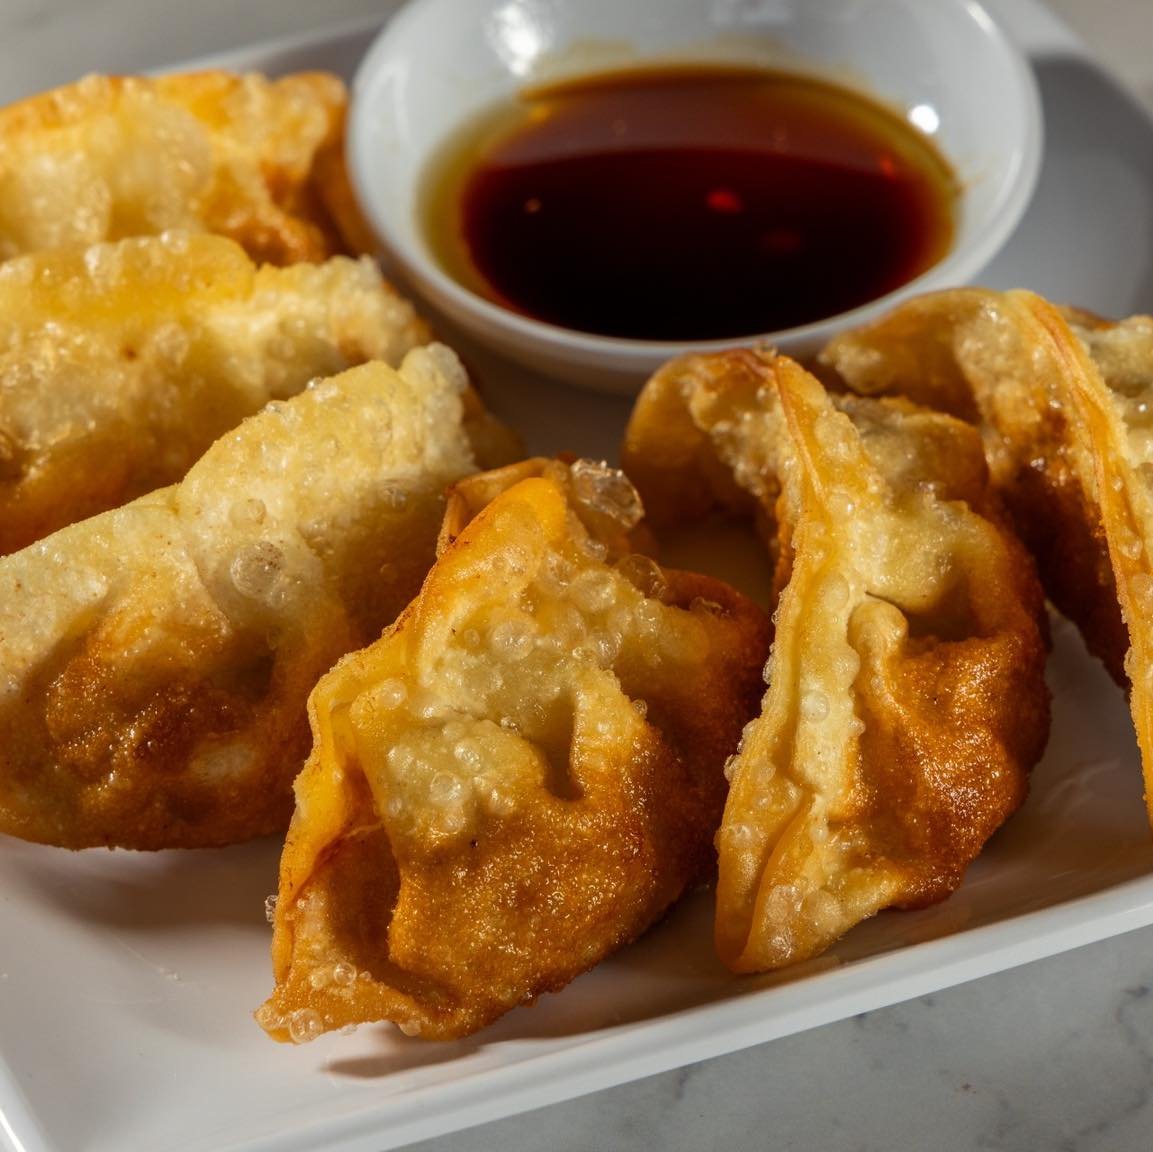 Does tonight's dinner @urokocafe begin with Gyoza's?

Try our Gyozas!
Six (6) deep fried ground chicken dumplings wrapped in a thin layer of dough, and served with a savory soy sauce-based dipping sauce for the perfect flavor combination.

👏 The Bes